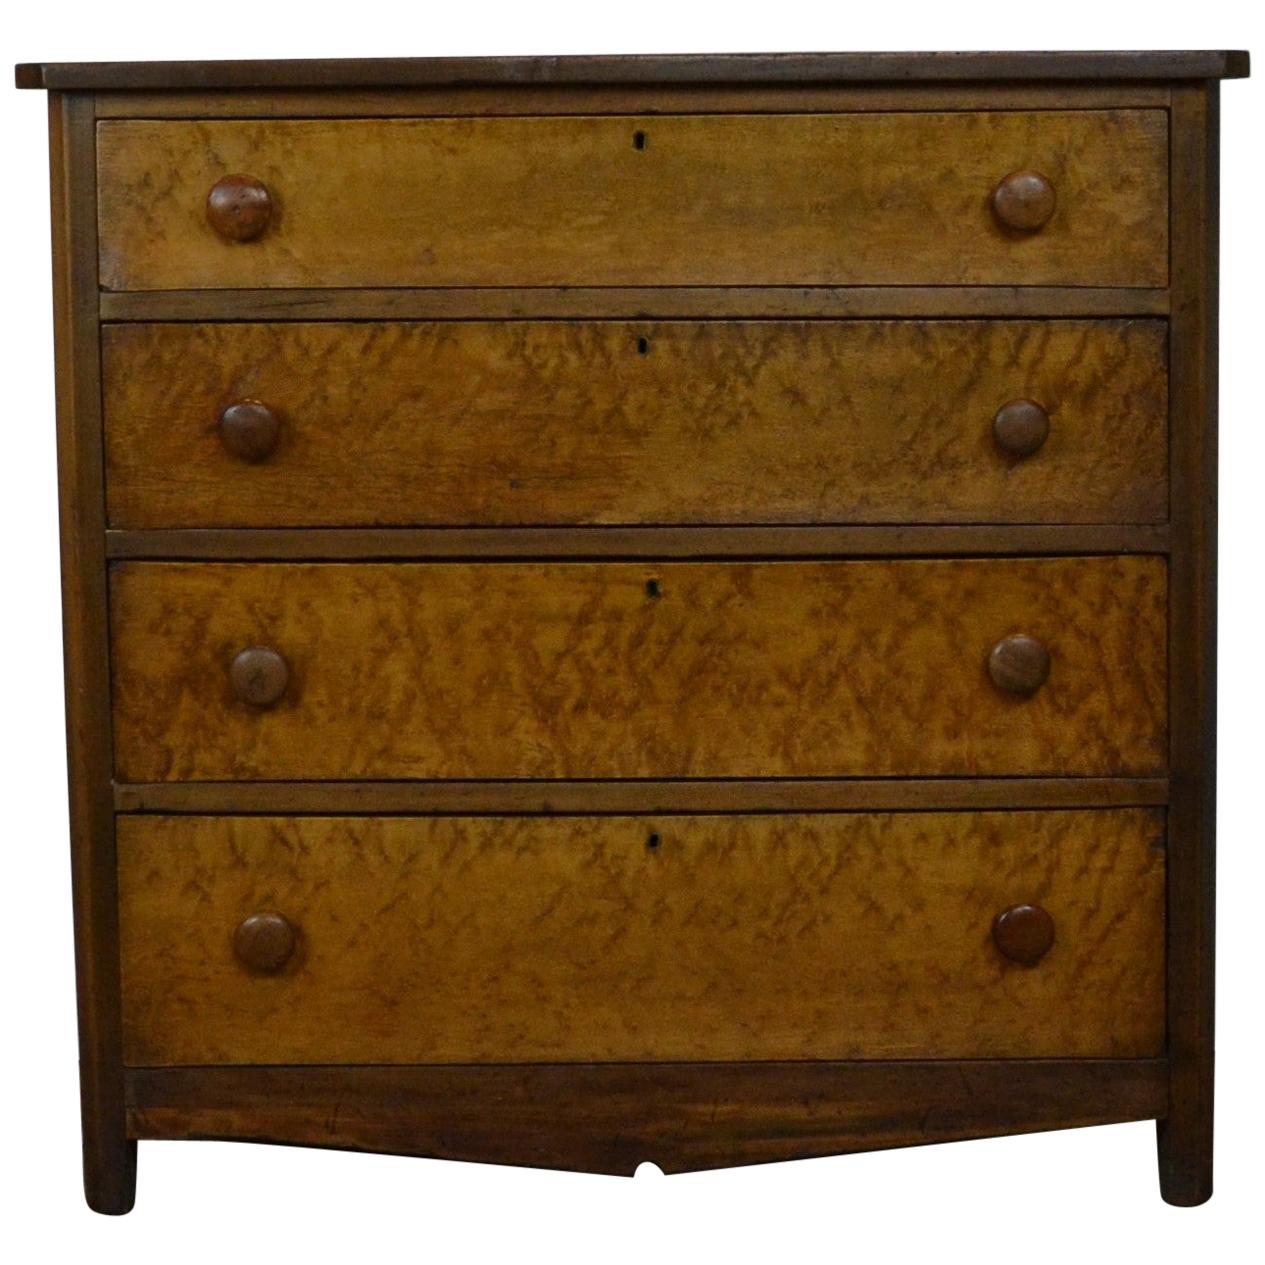 19th Century American Chest of Drawers